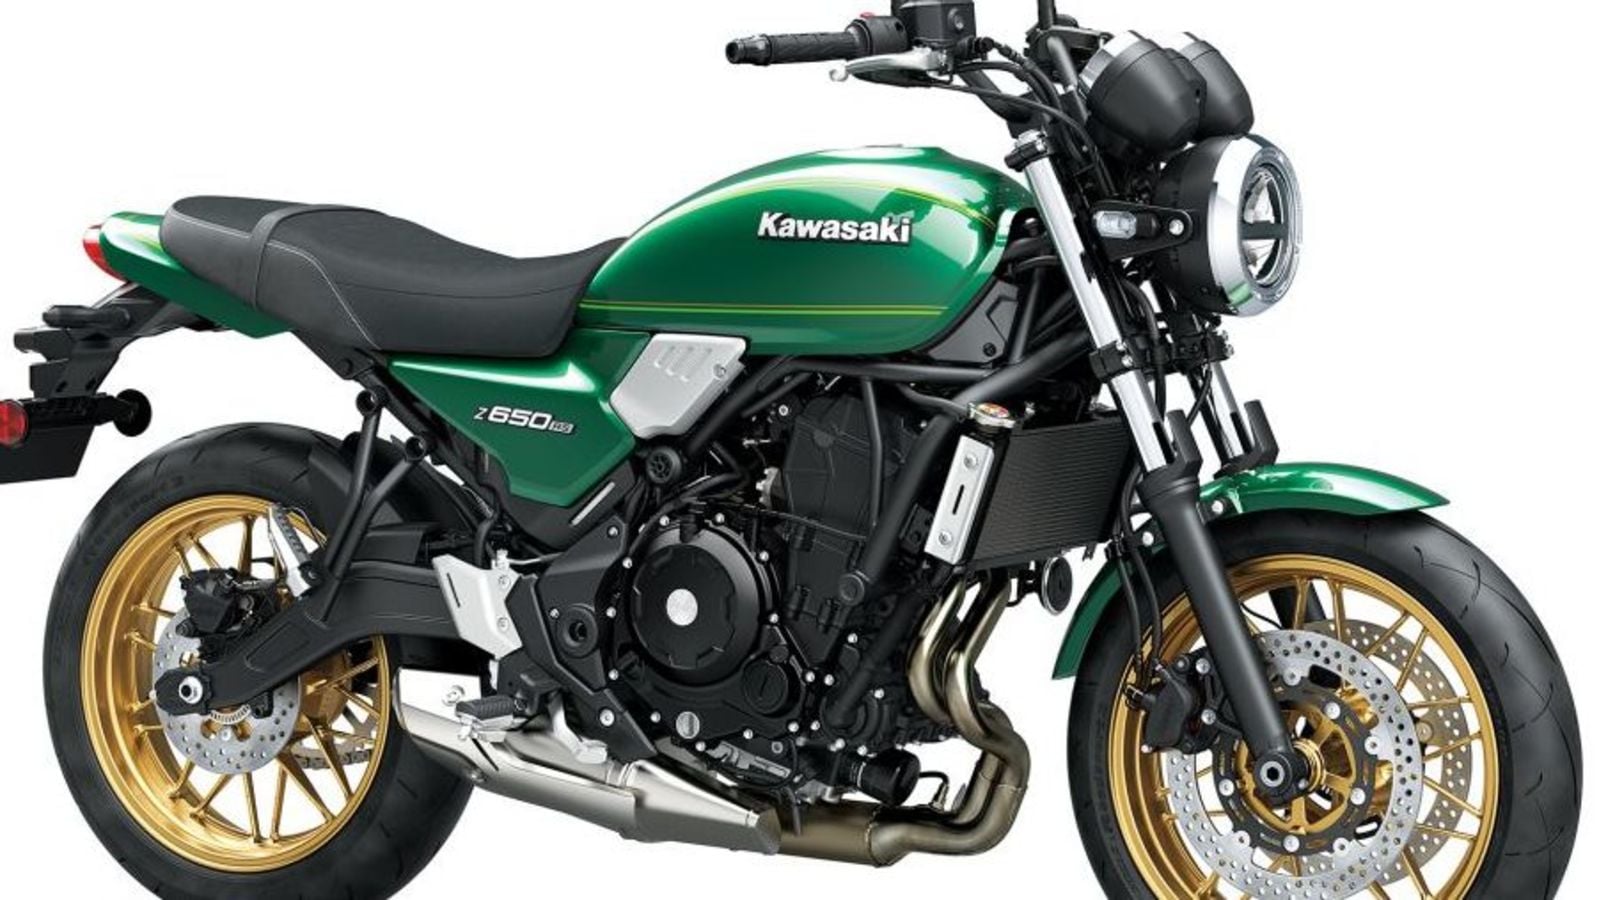 fængelsflugt dommer lugt Kawasaki India announces price hike throughout the models. Check new prices  here